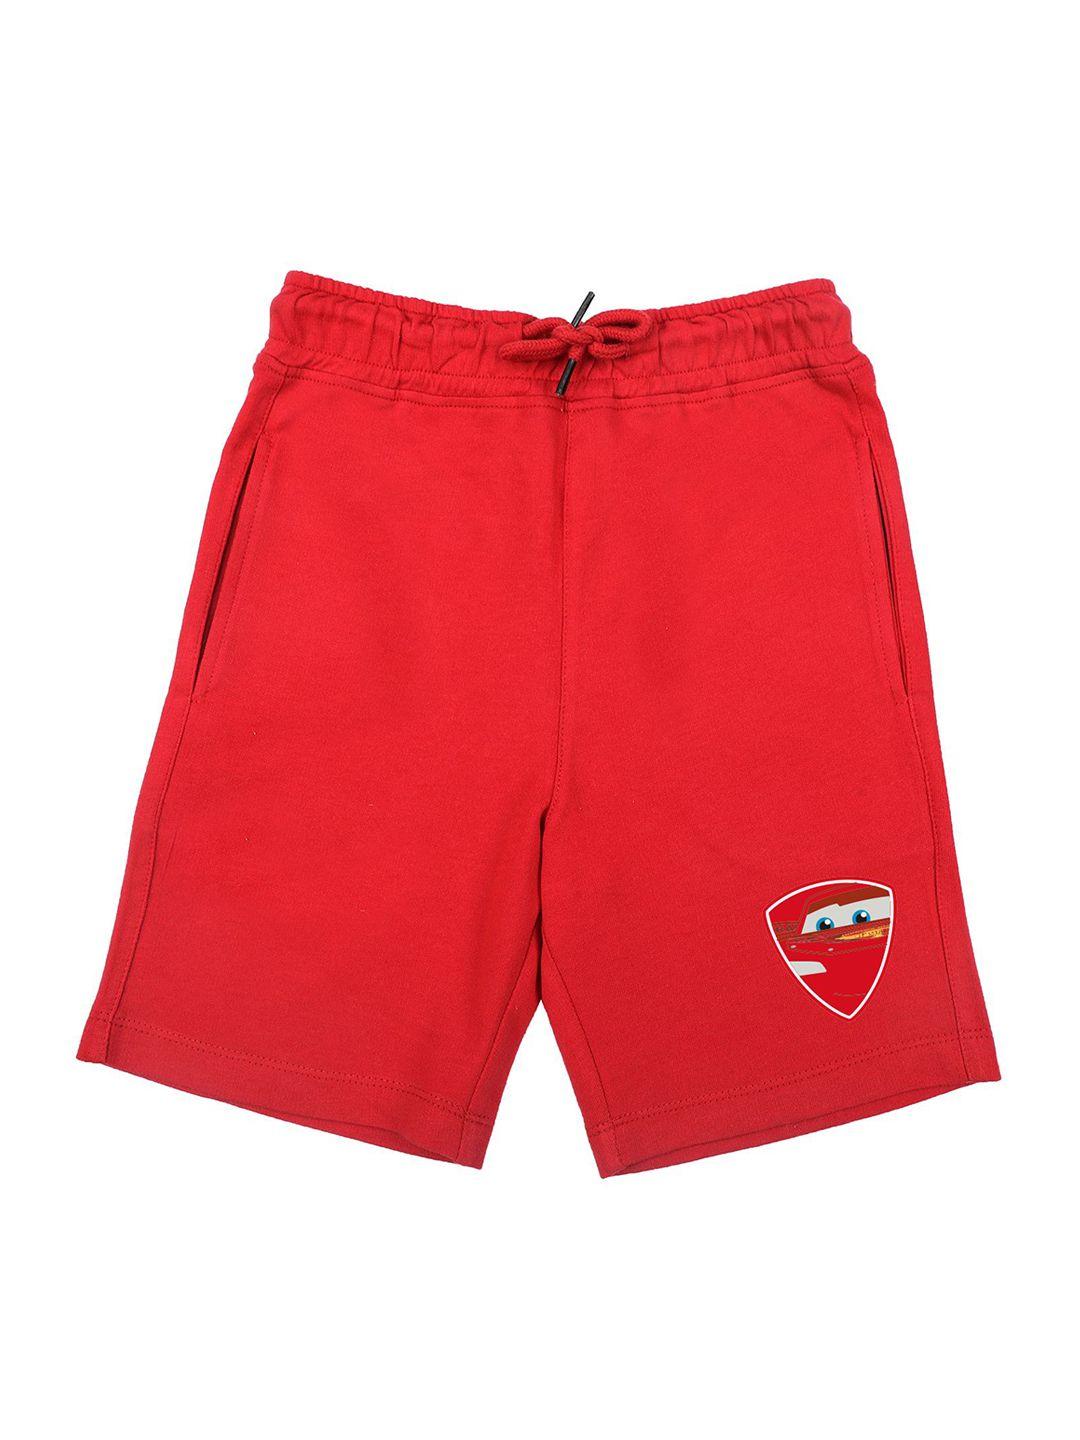 disney by wear your mind boys red solid regular fit shorts